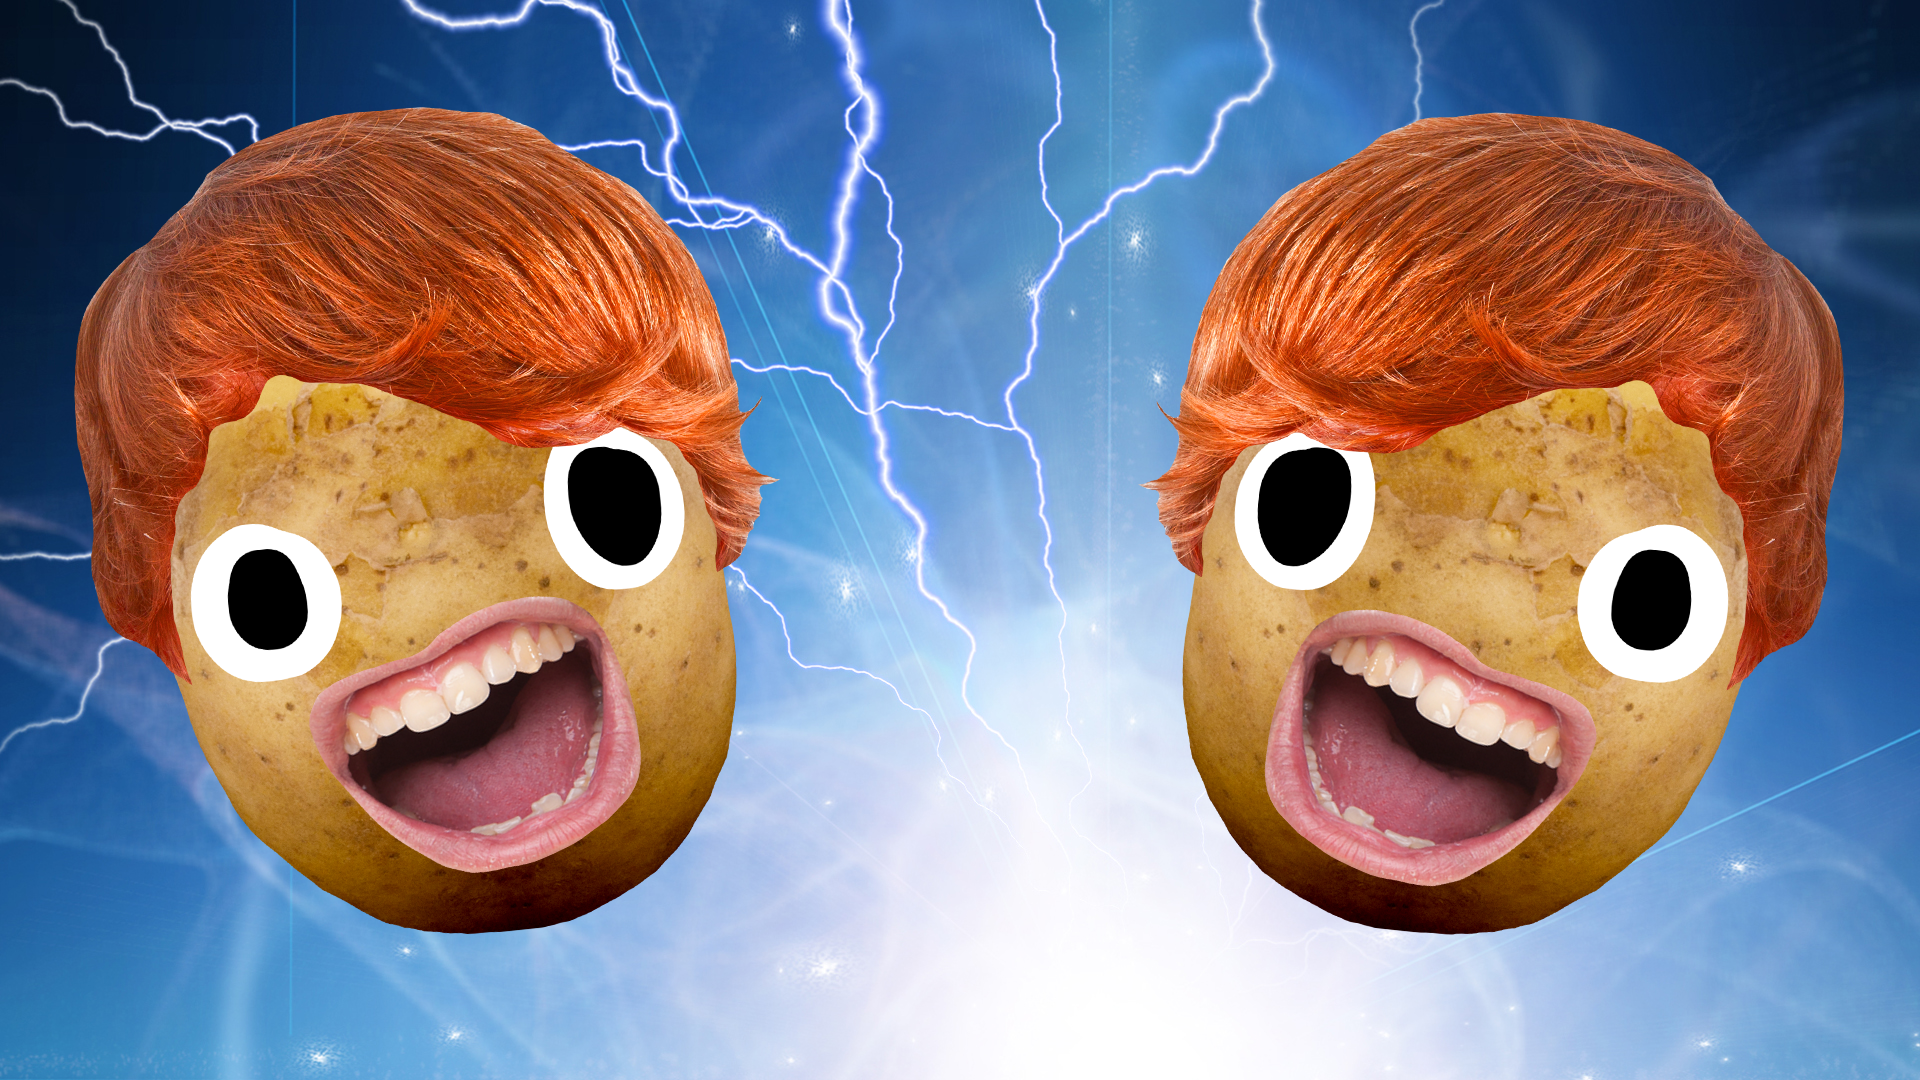 The Weasley twins in potato form